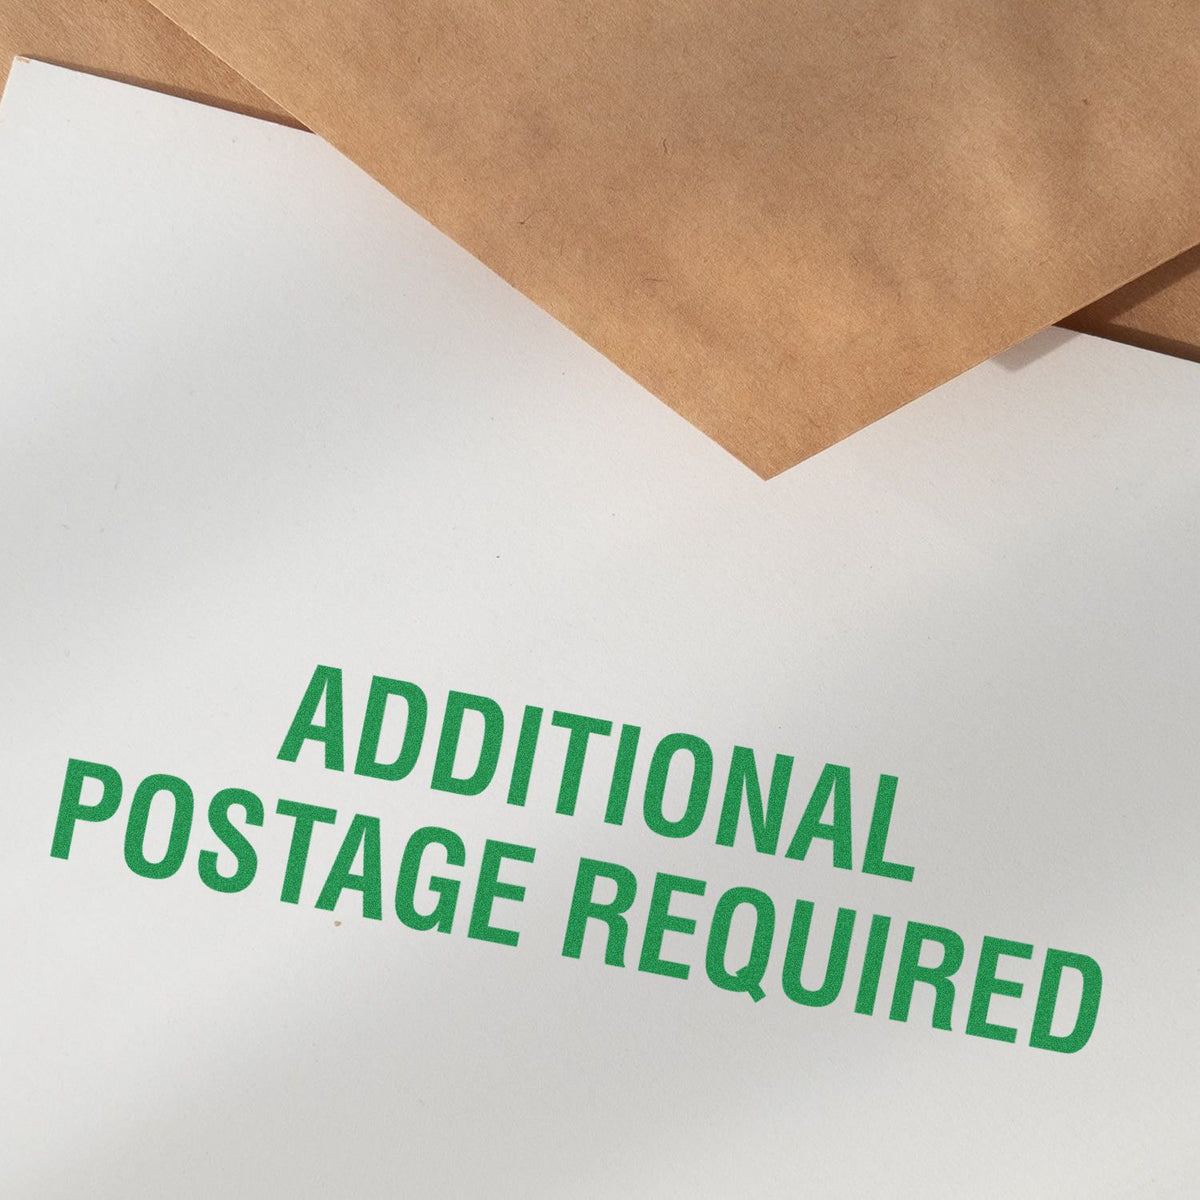 Slim Pre-Inked Additional Postage Required Stamp In Use